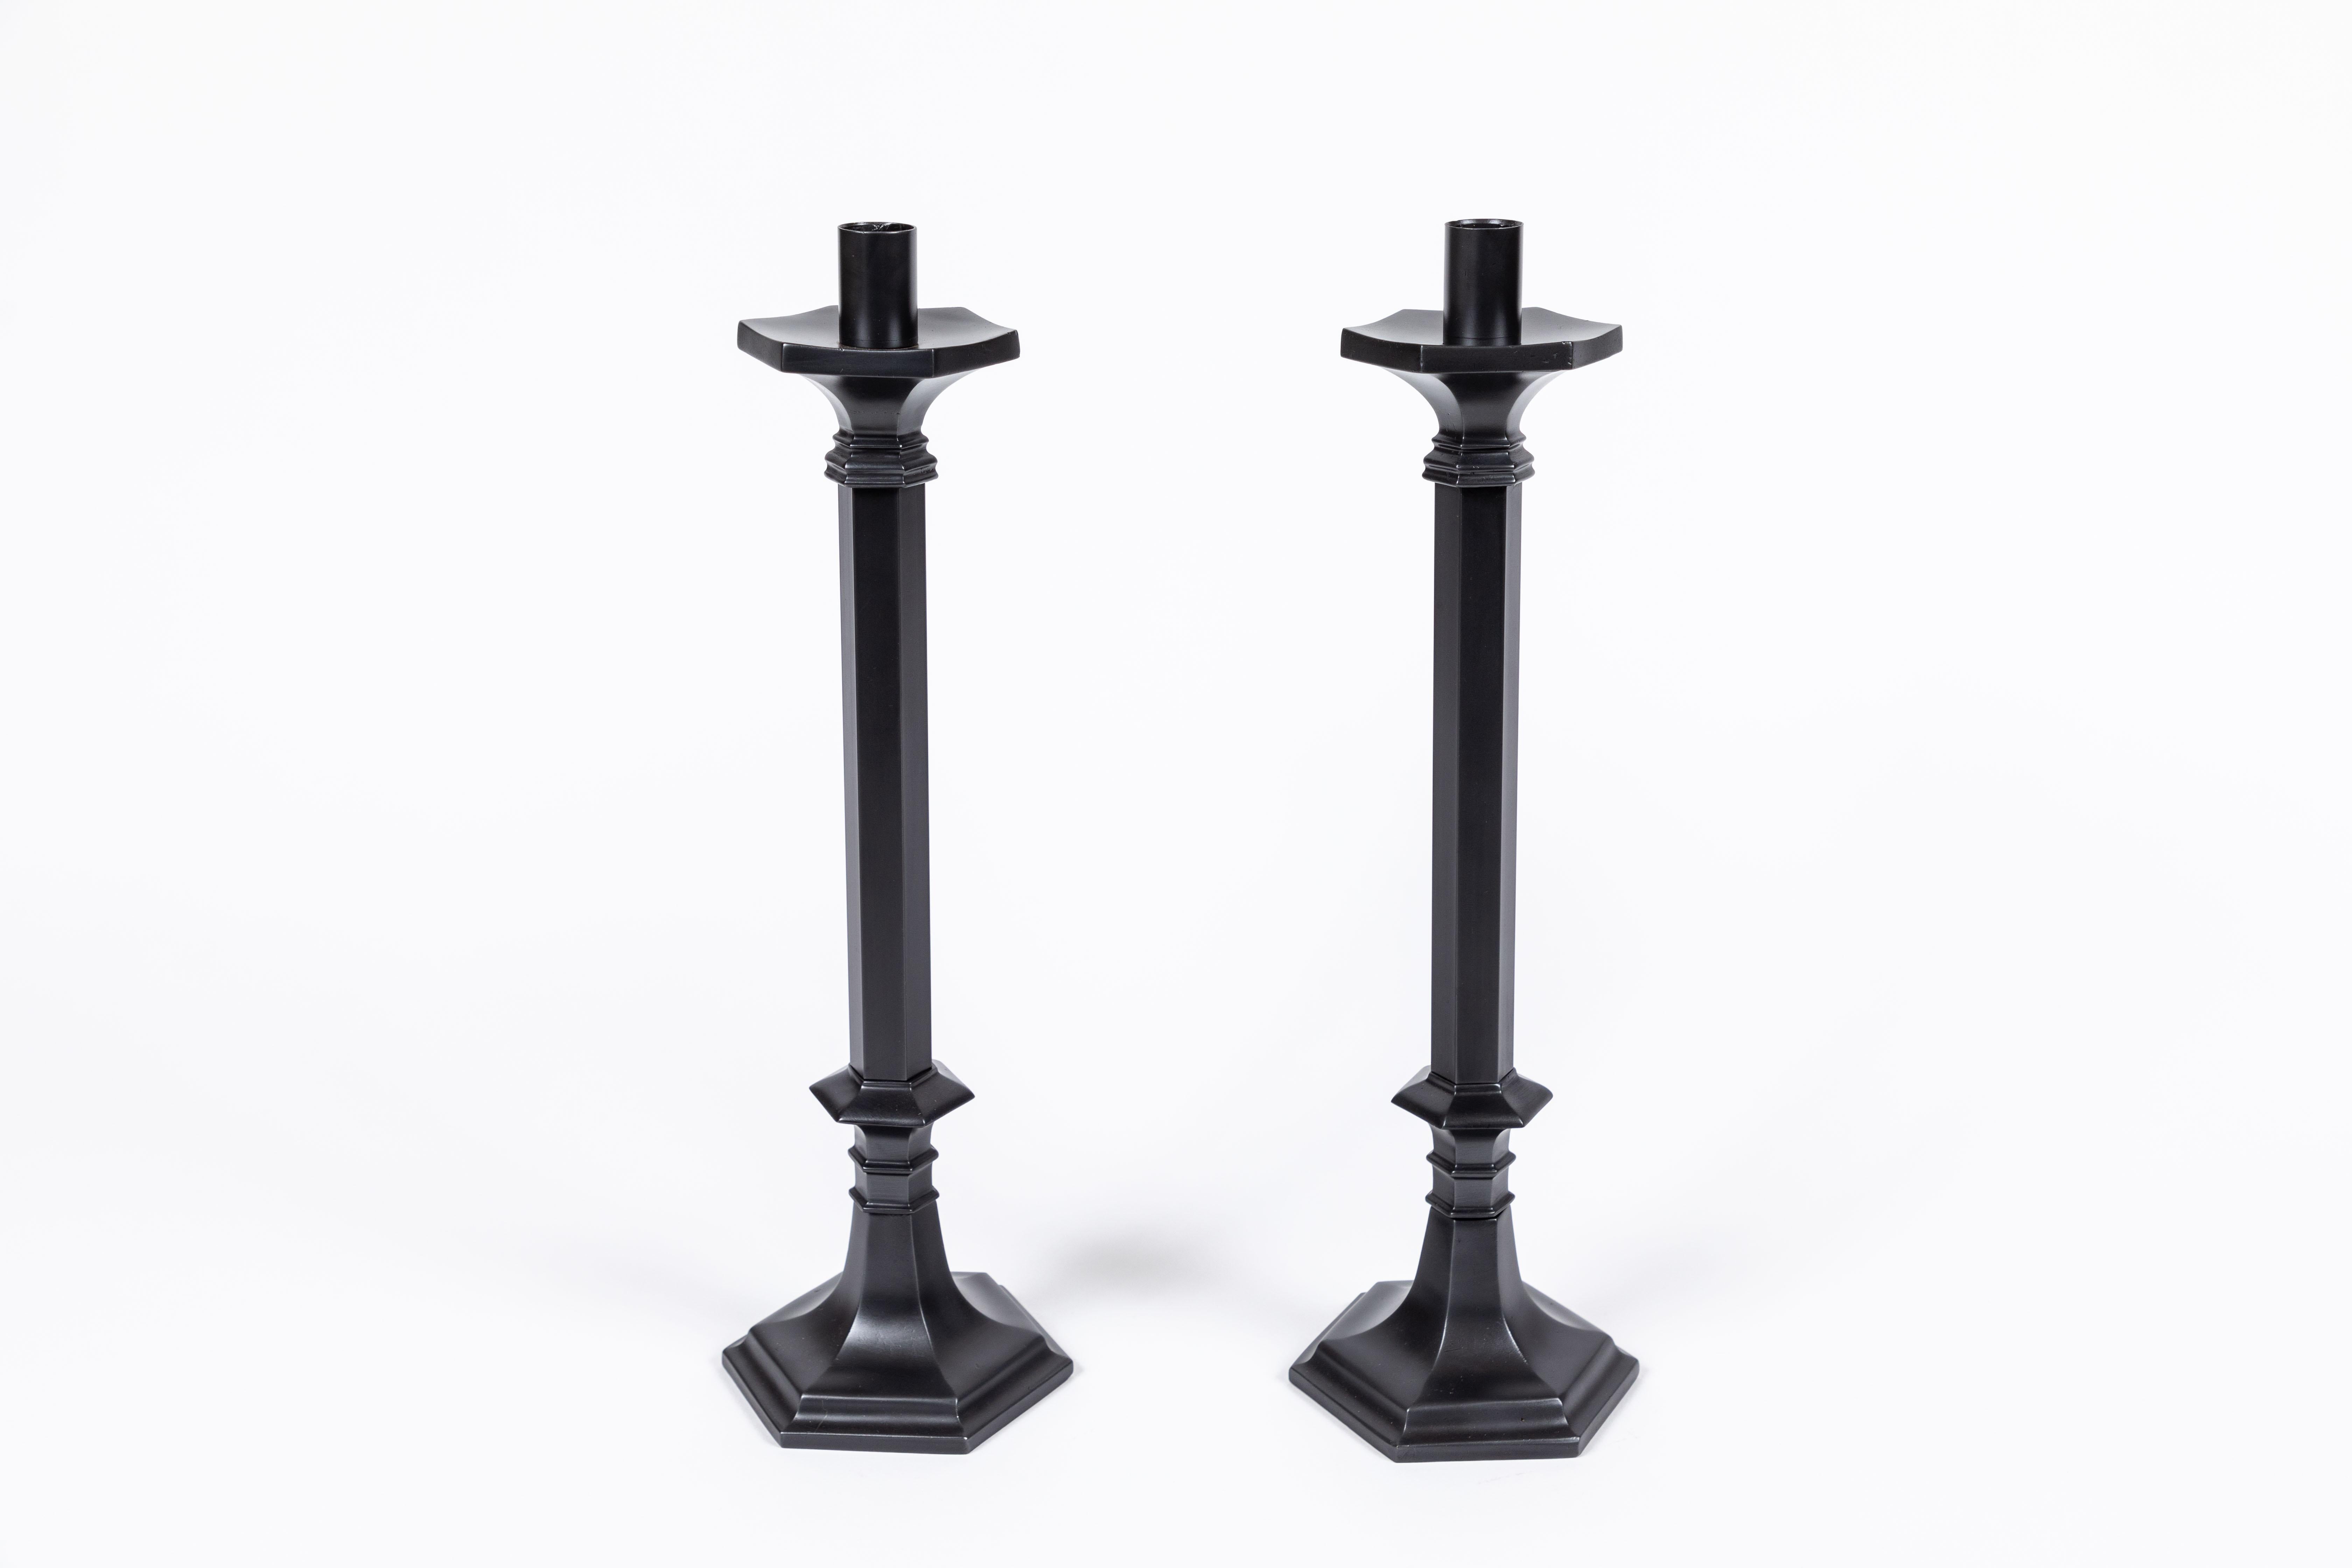 Outstanding pair of tall vintage heavy 'Rostand' stick brass candlesticks. They have been refurbished with a new oil rubbed bronze finish. Quite a statement on any table!